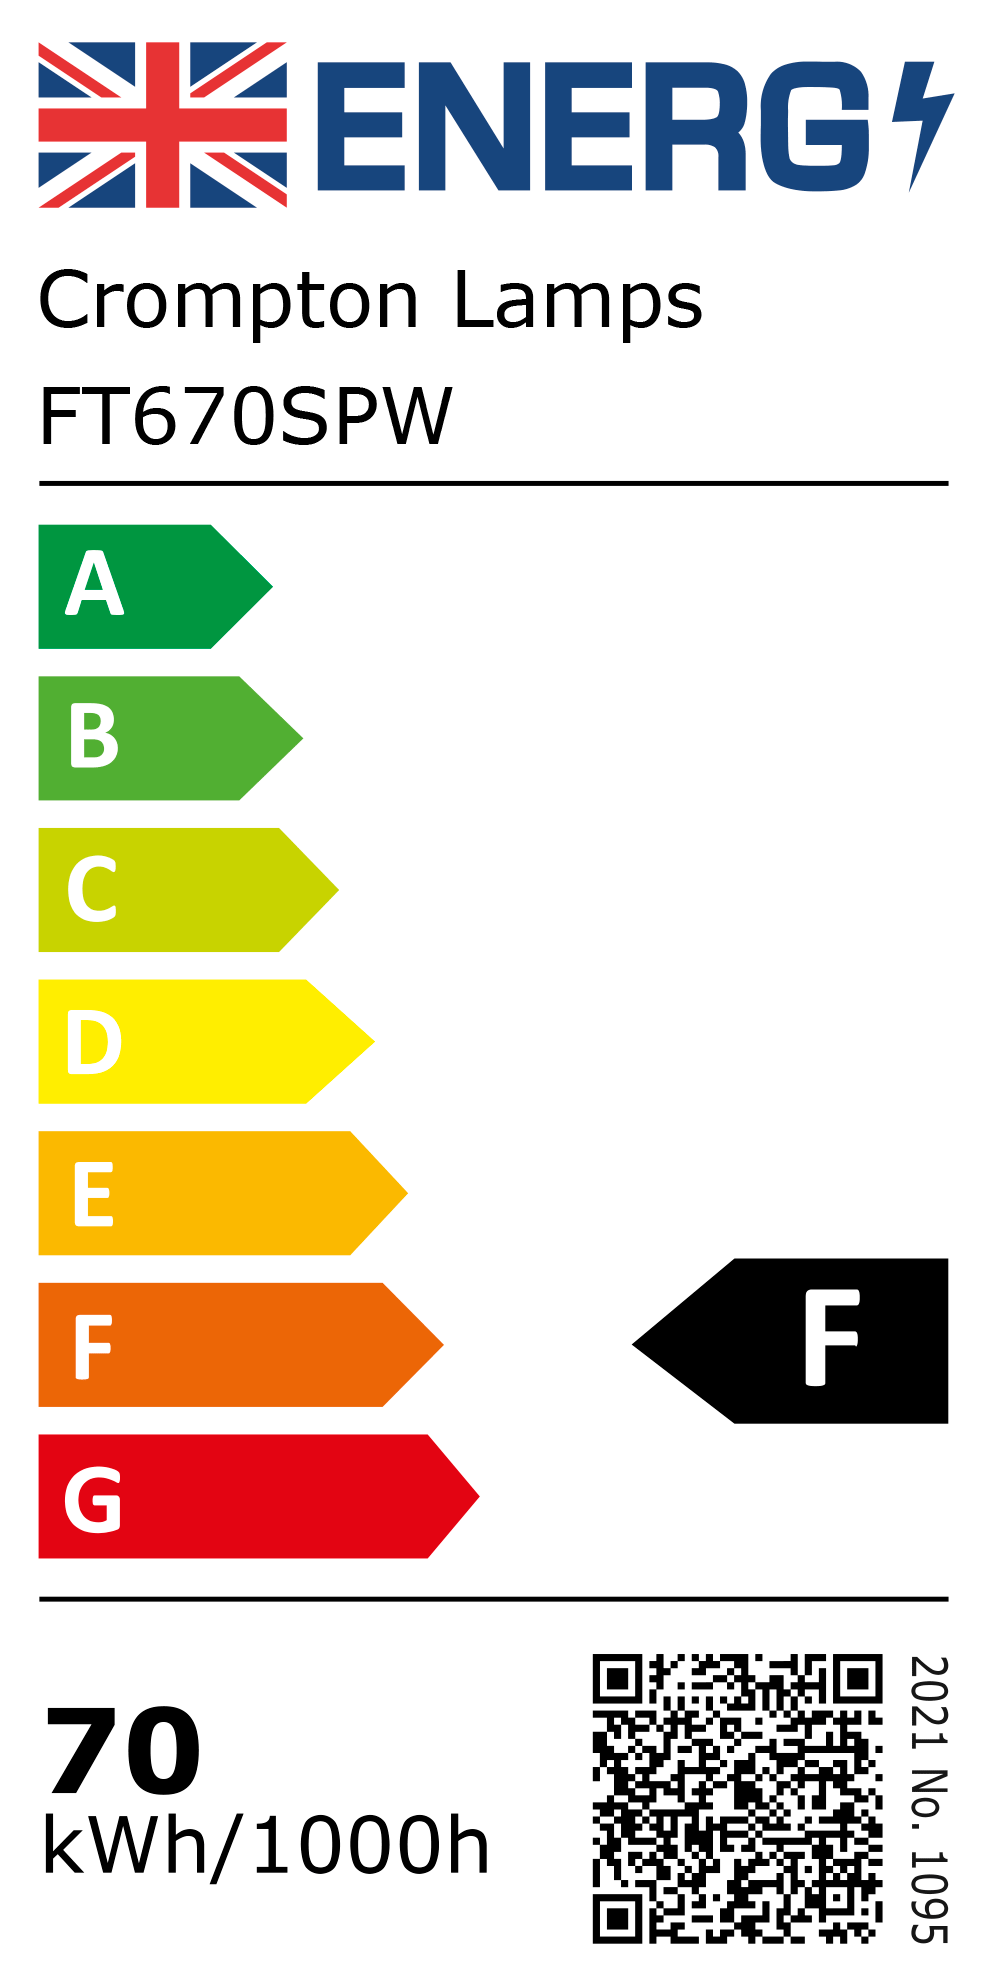 New 2021 Energy Rating Label: Stock Code FT670SPW